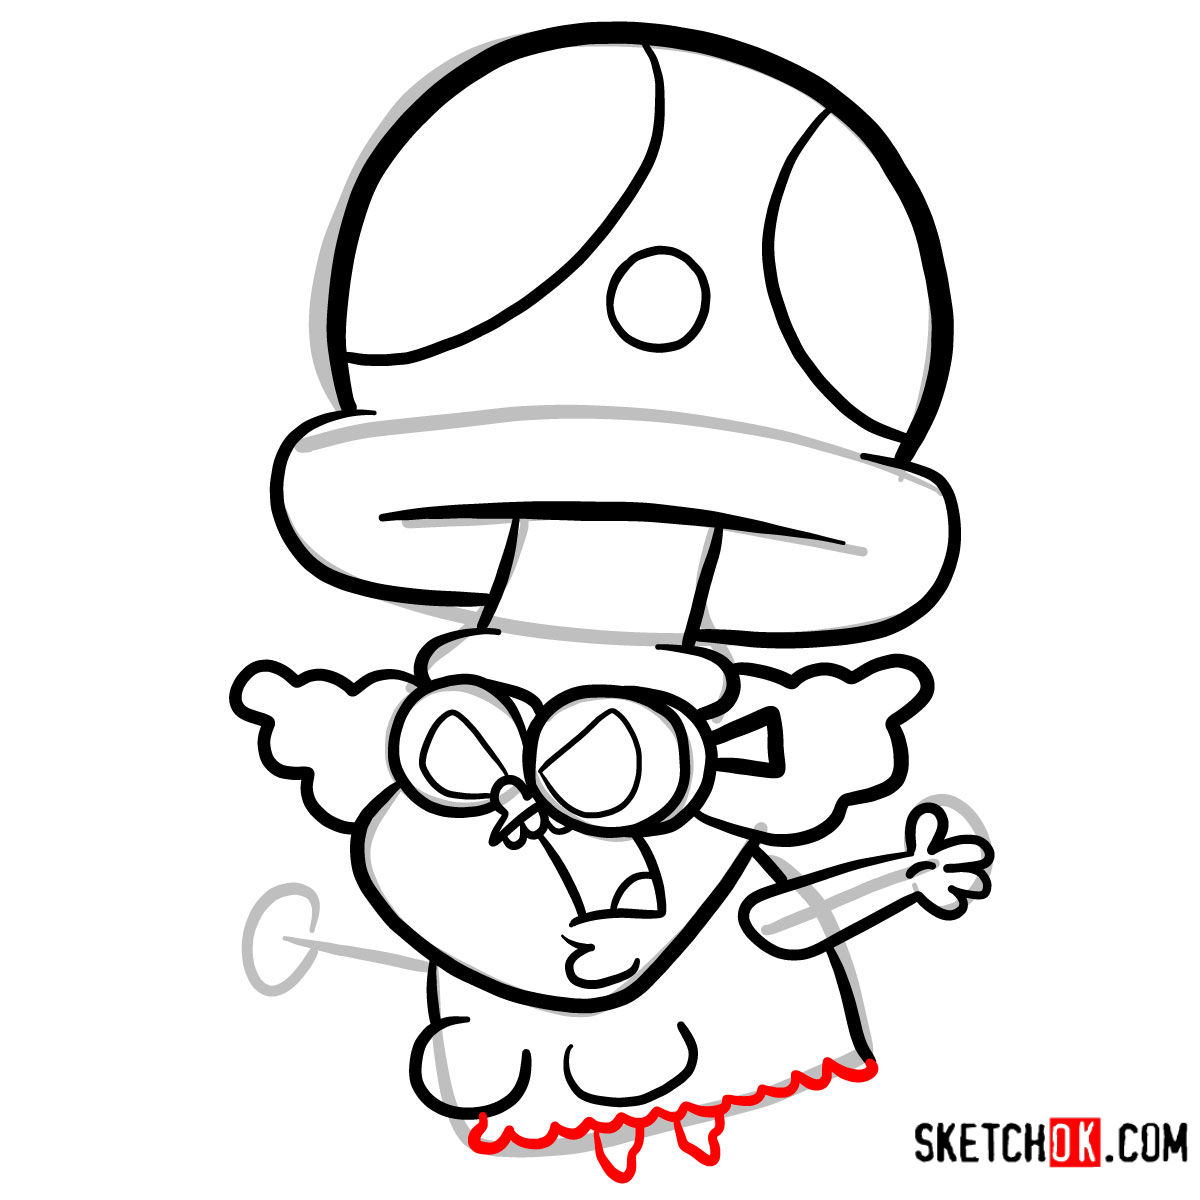 How to draw Truffles from Chowder series - step 09